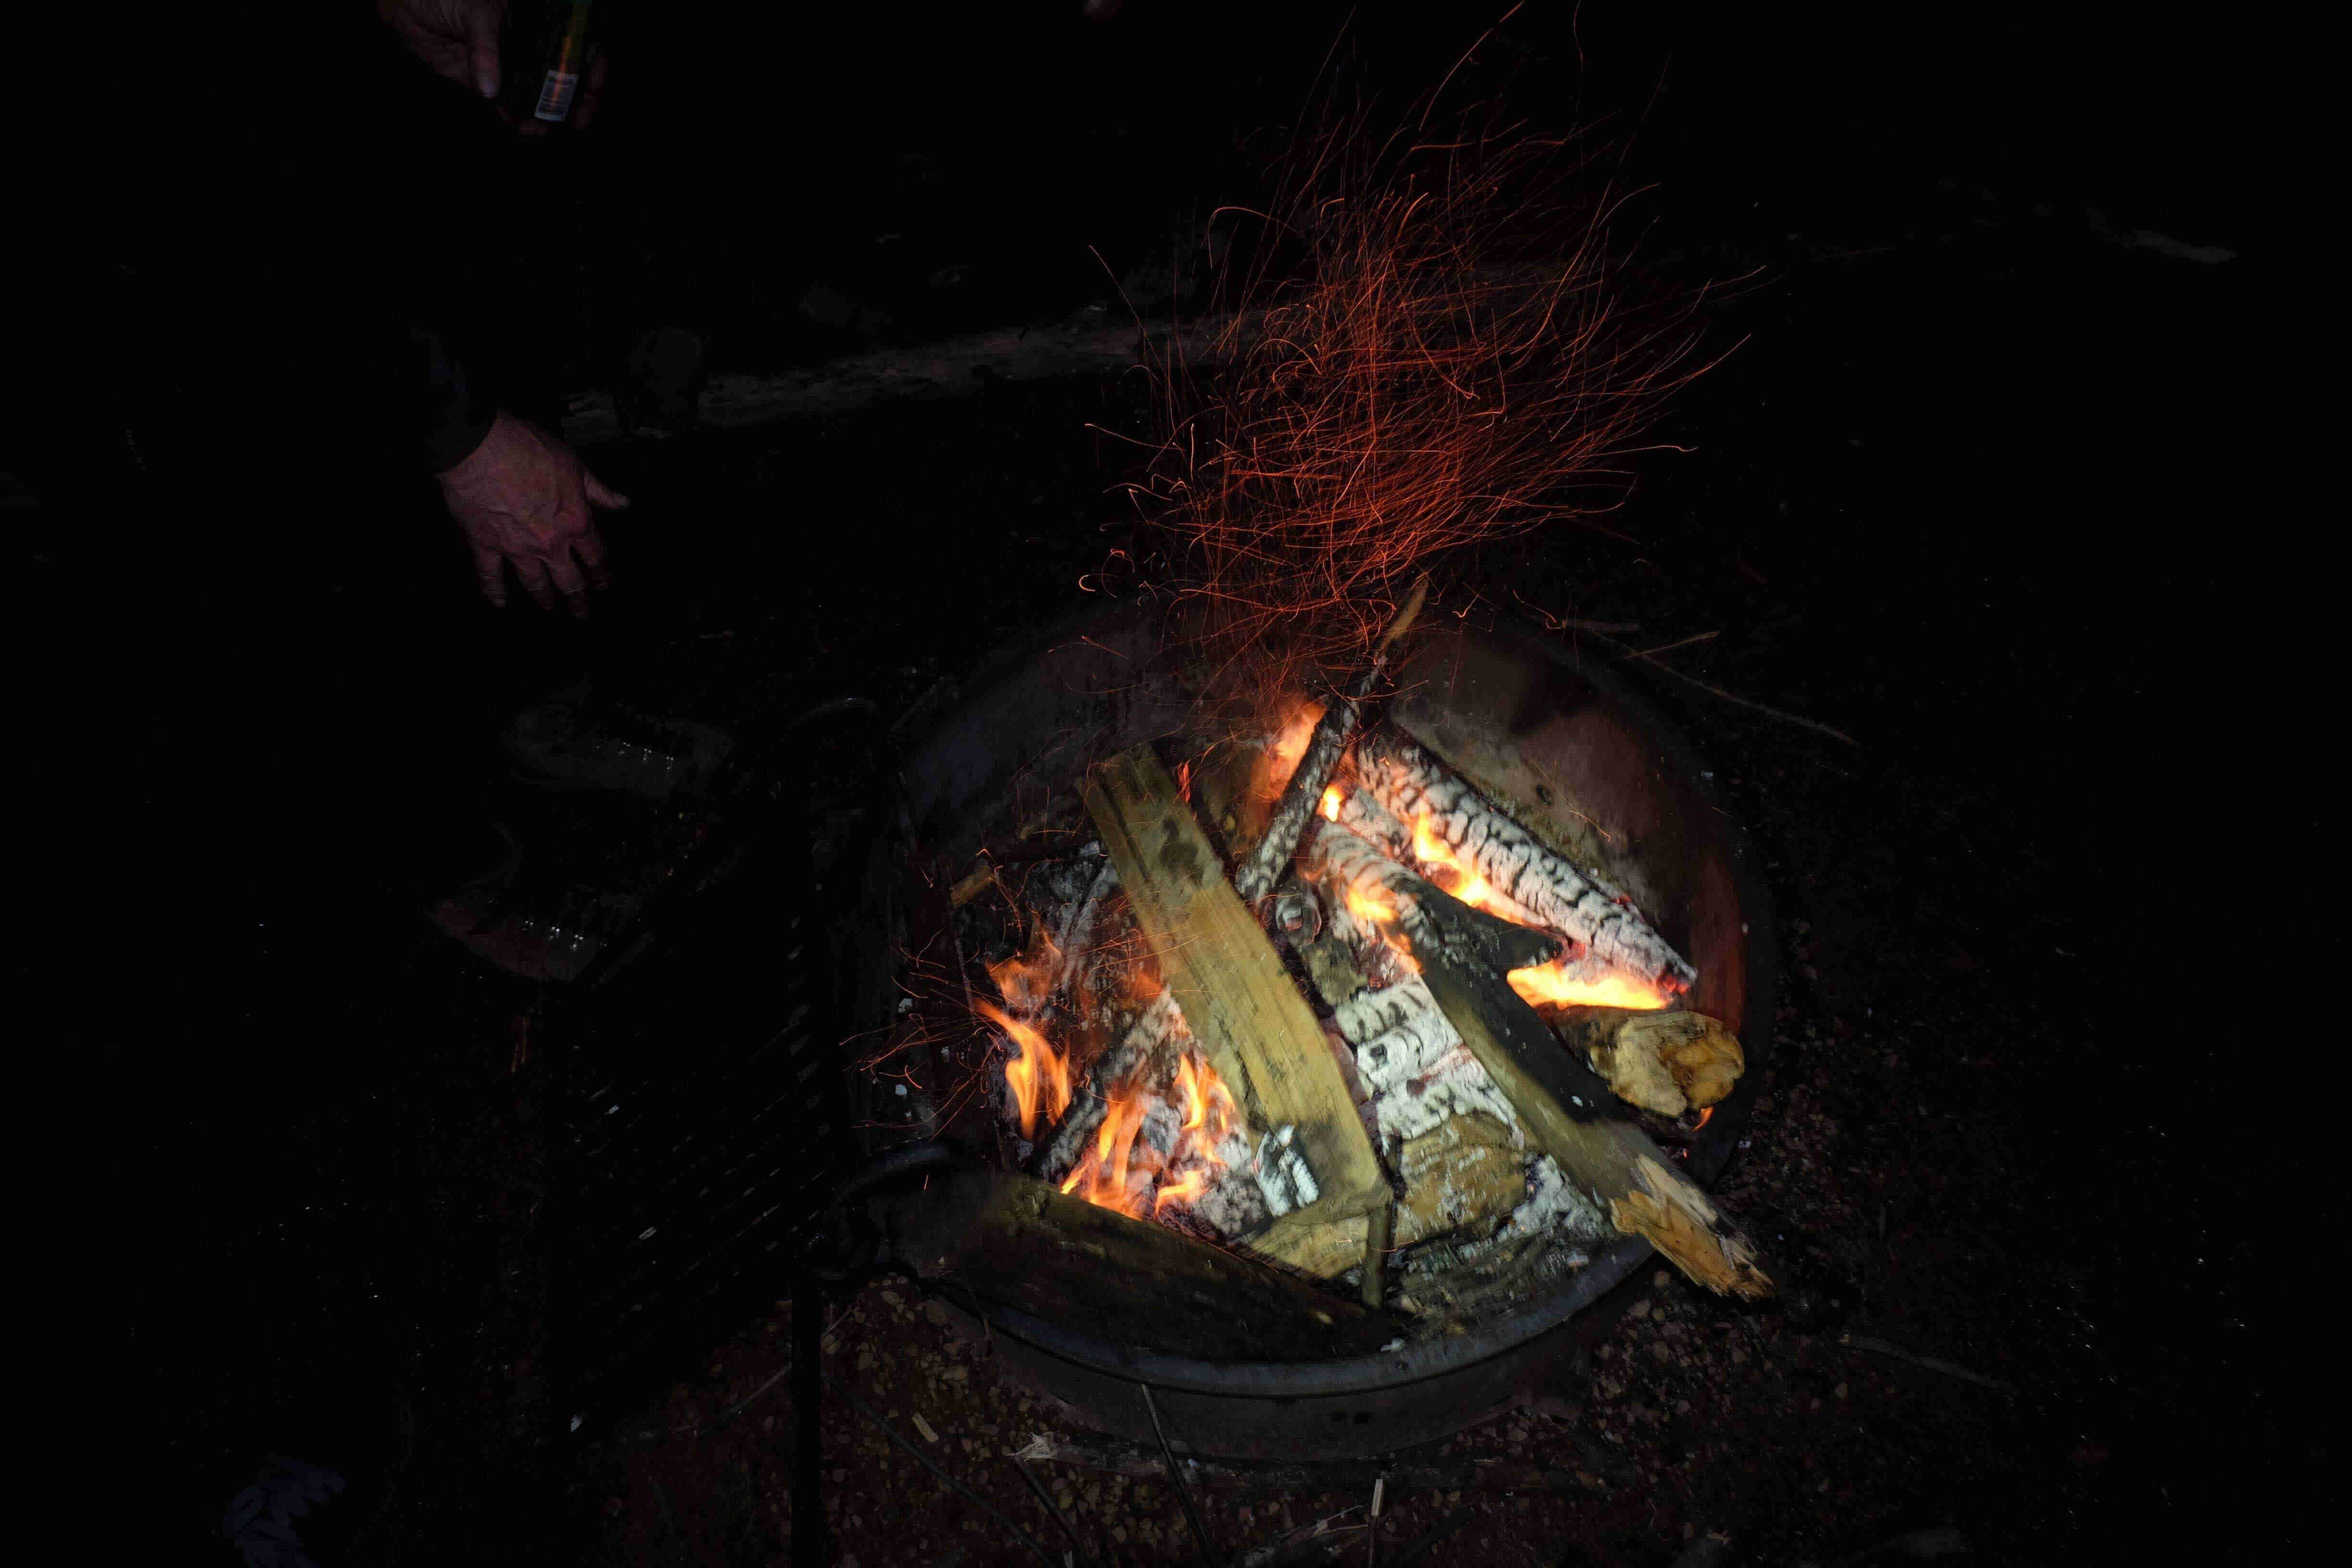 Downward view of a fire ring with a burning logs, in the dark at night